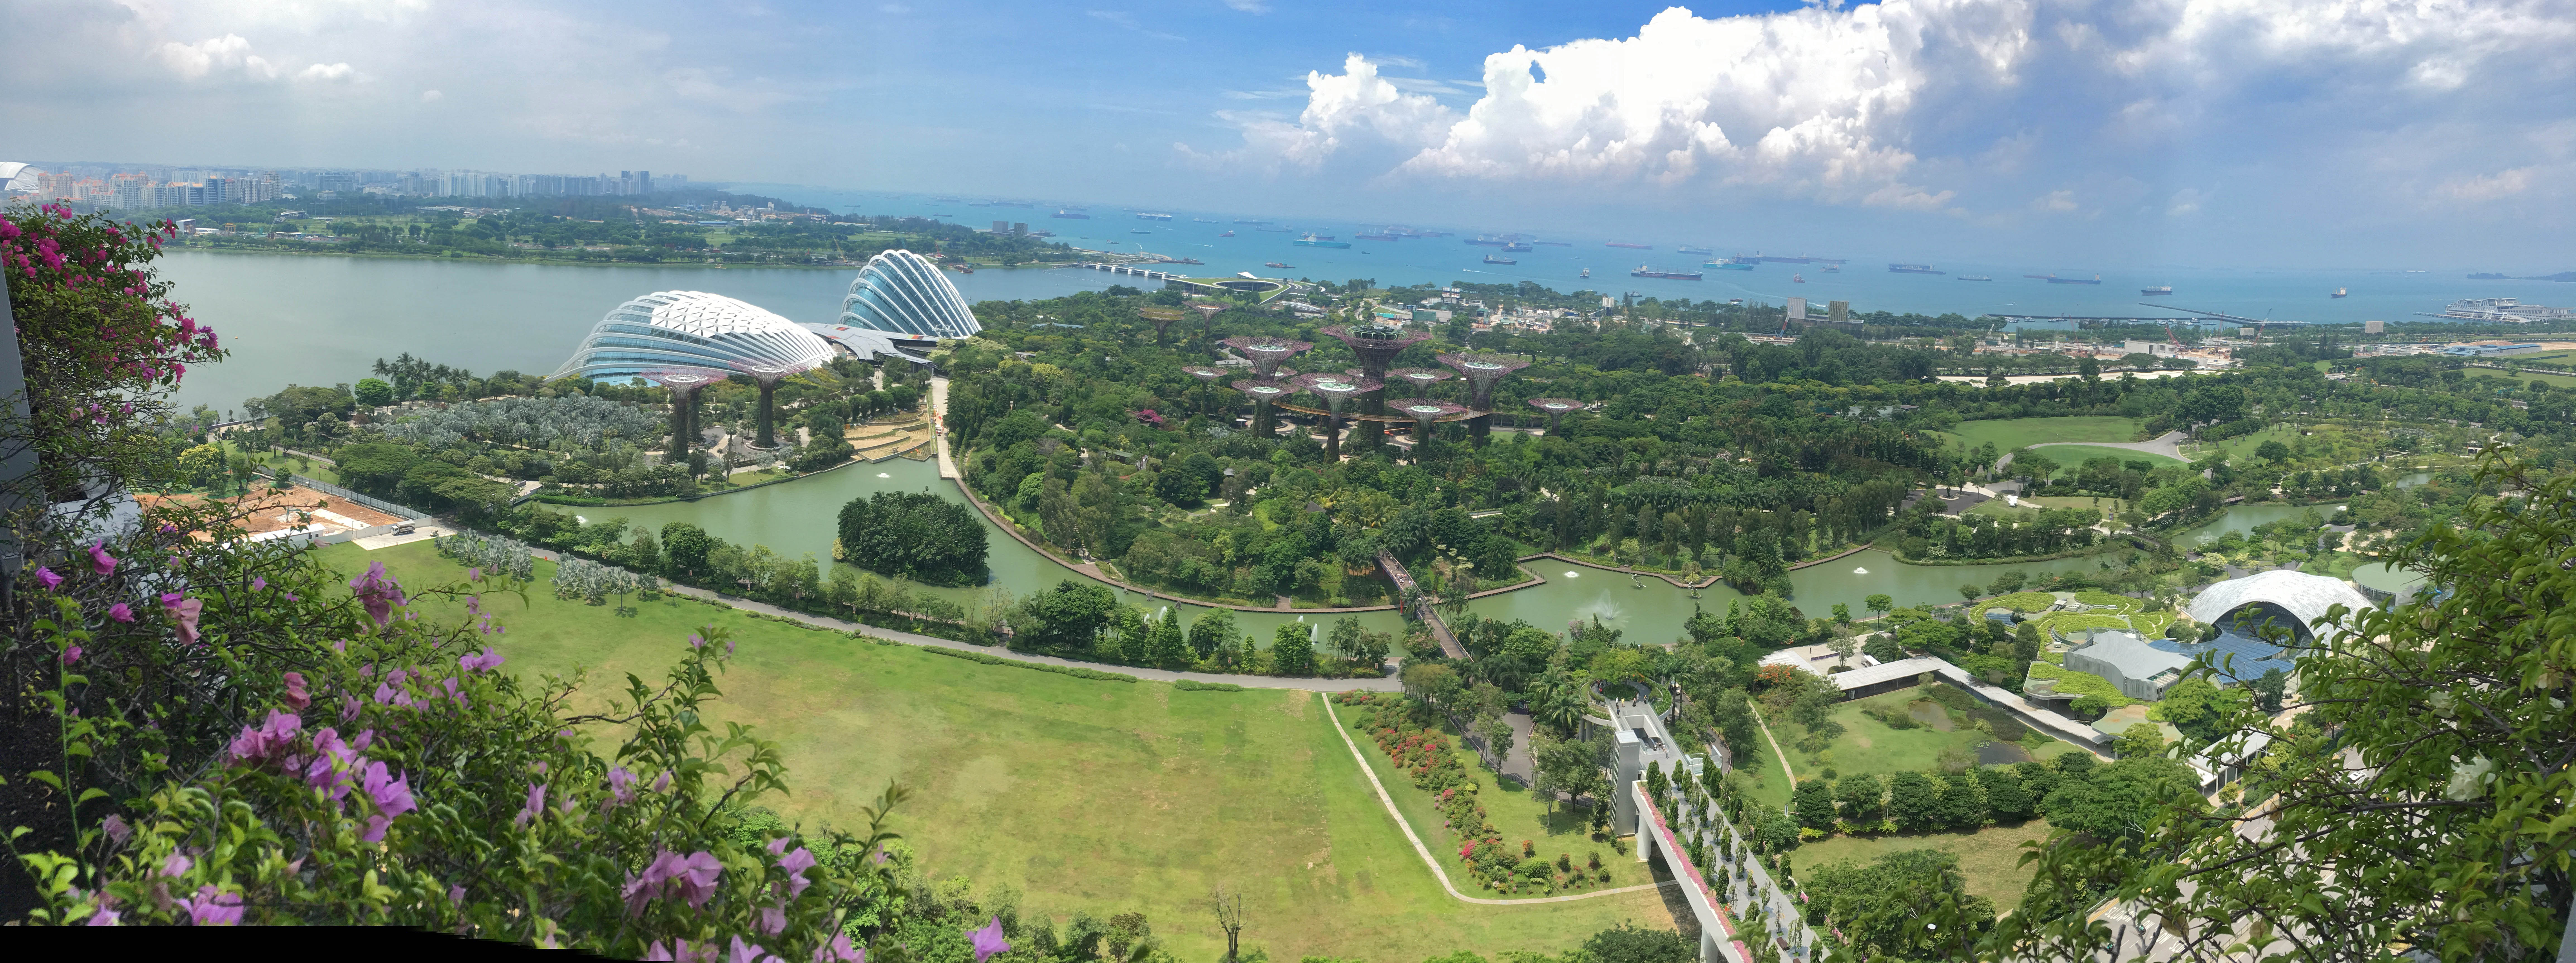 Premier Gardens by the Bay Room View